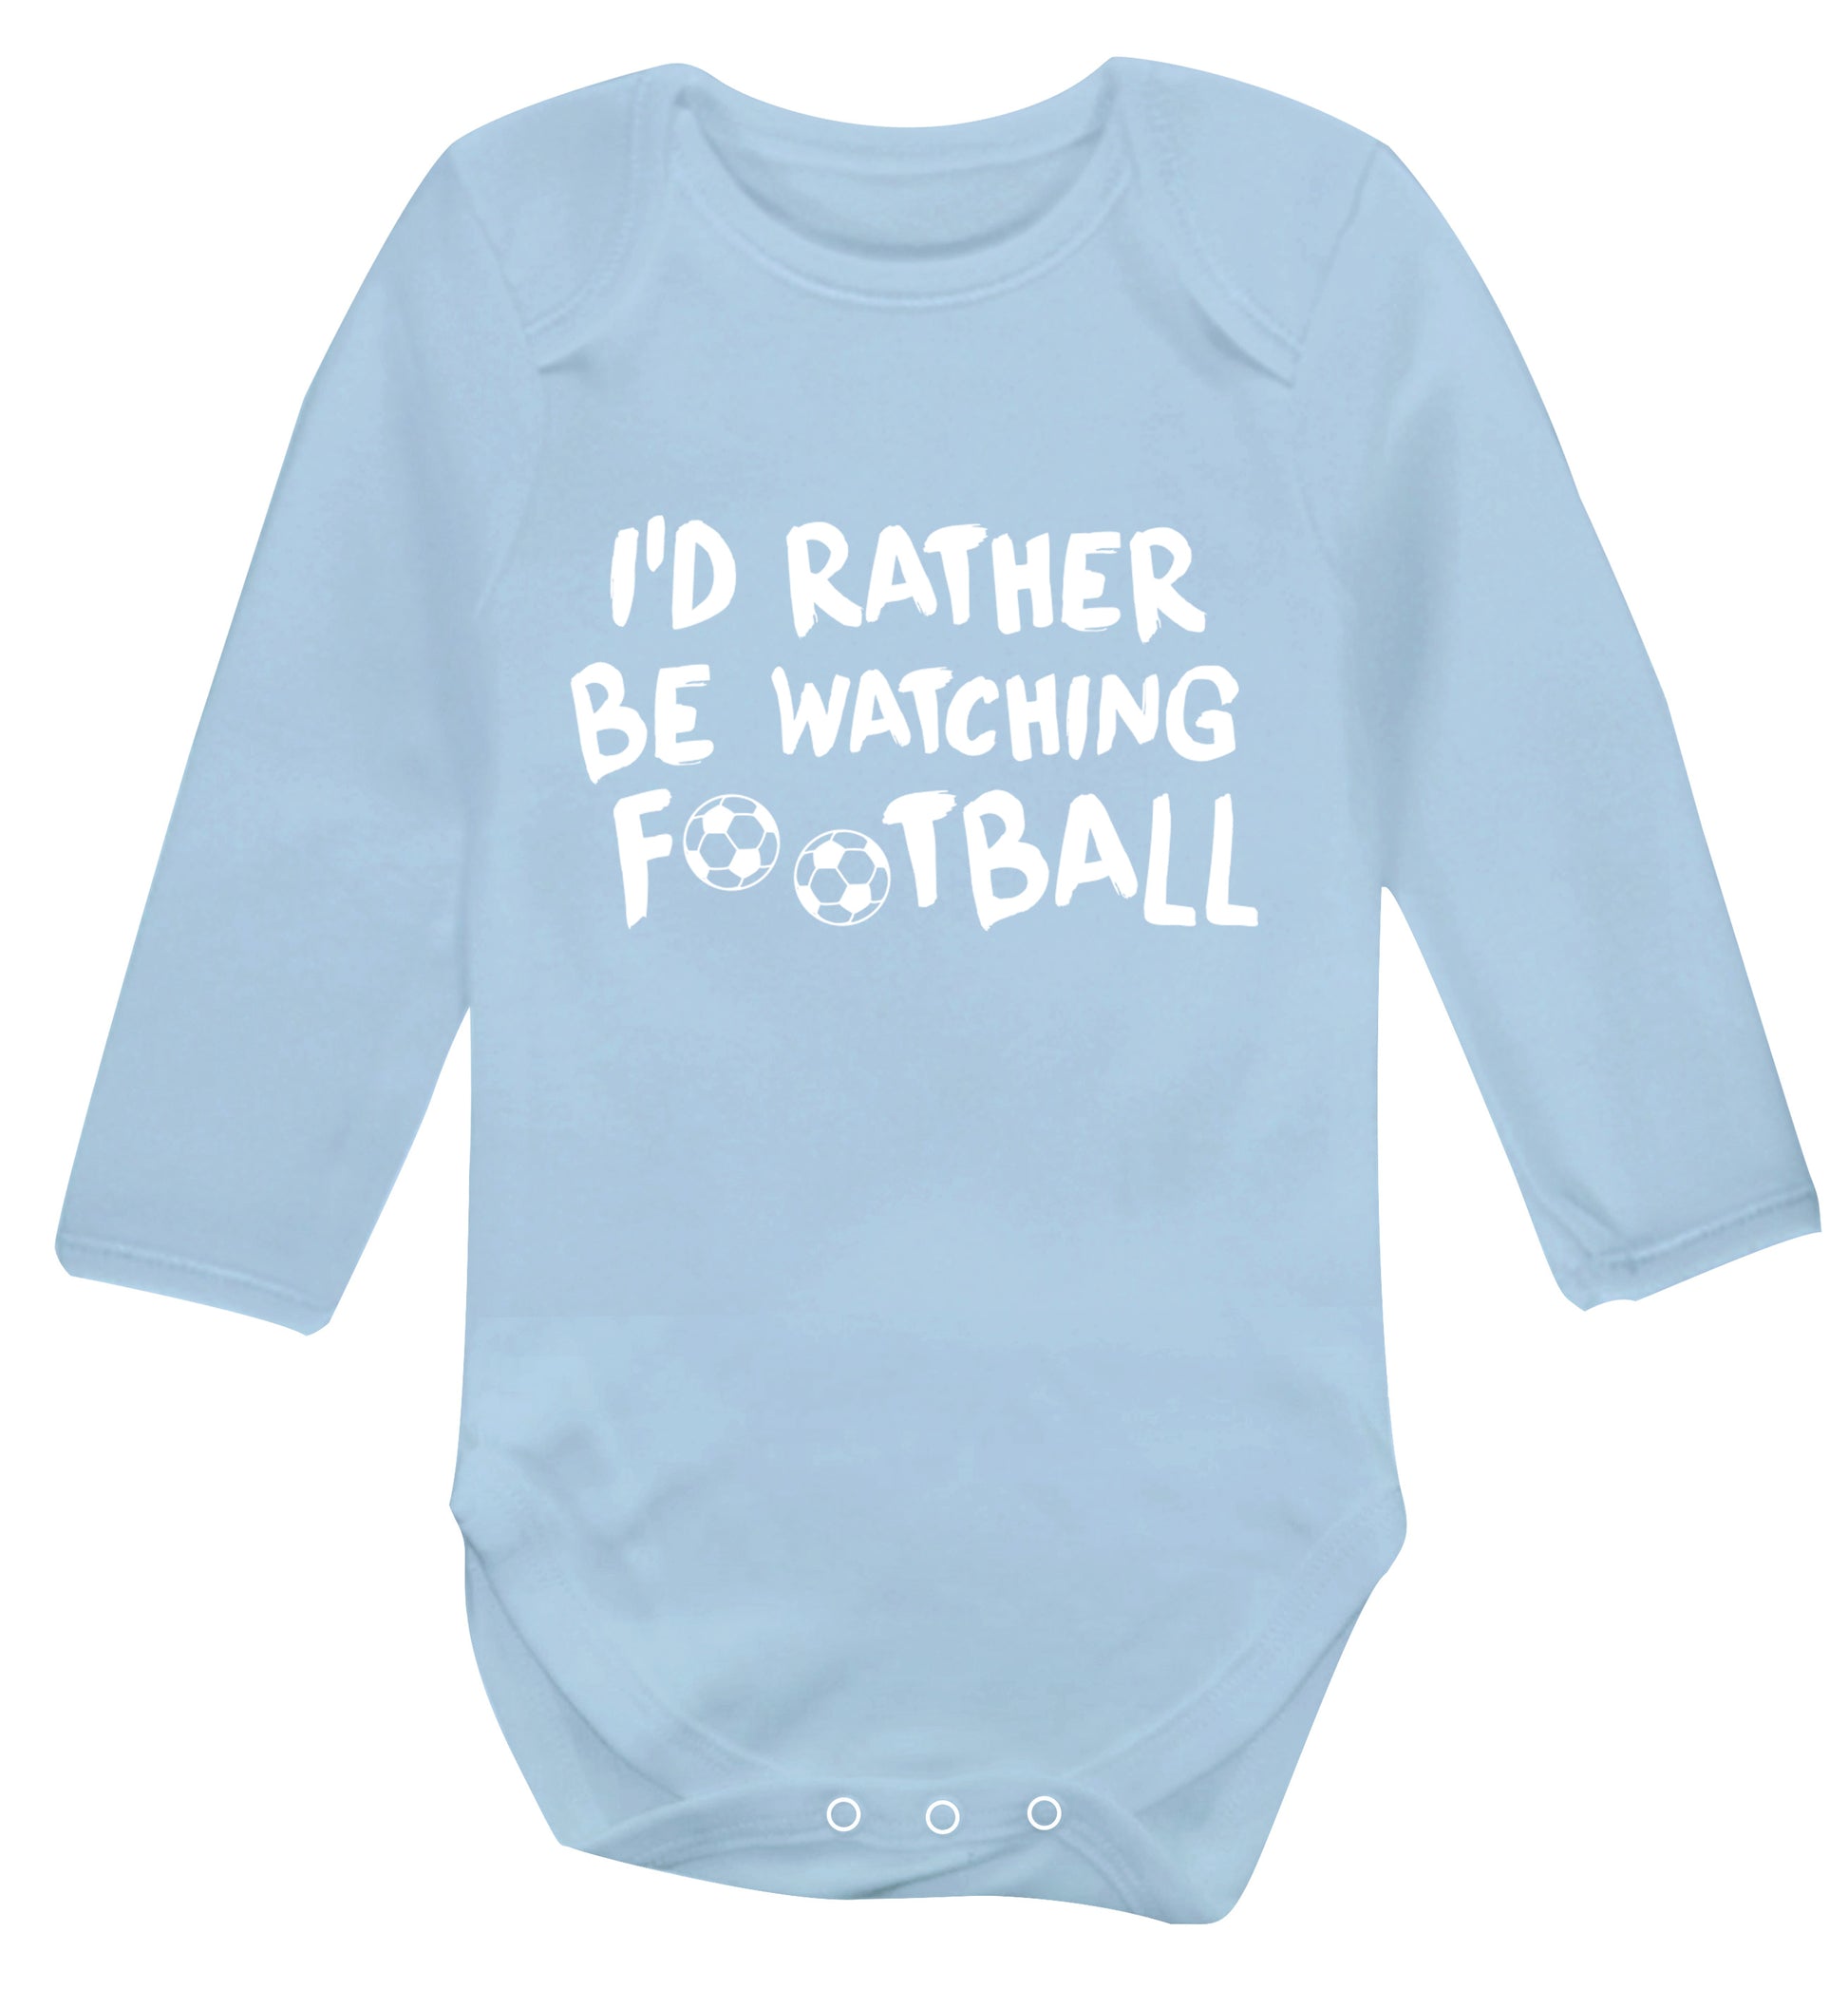 I'd rather be watching football Baby Vest long sleeved pale blue 6-12 months